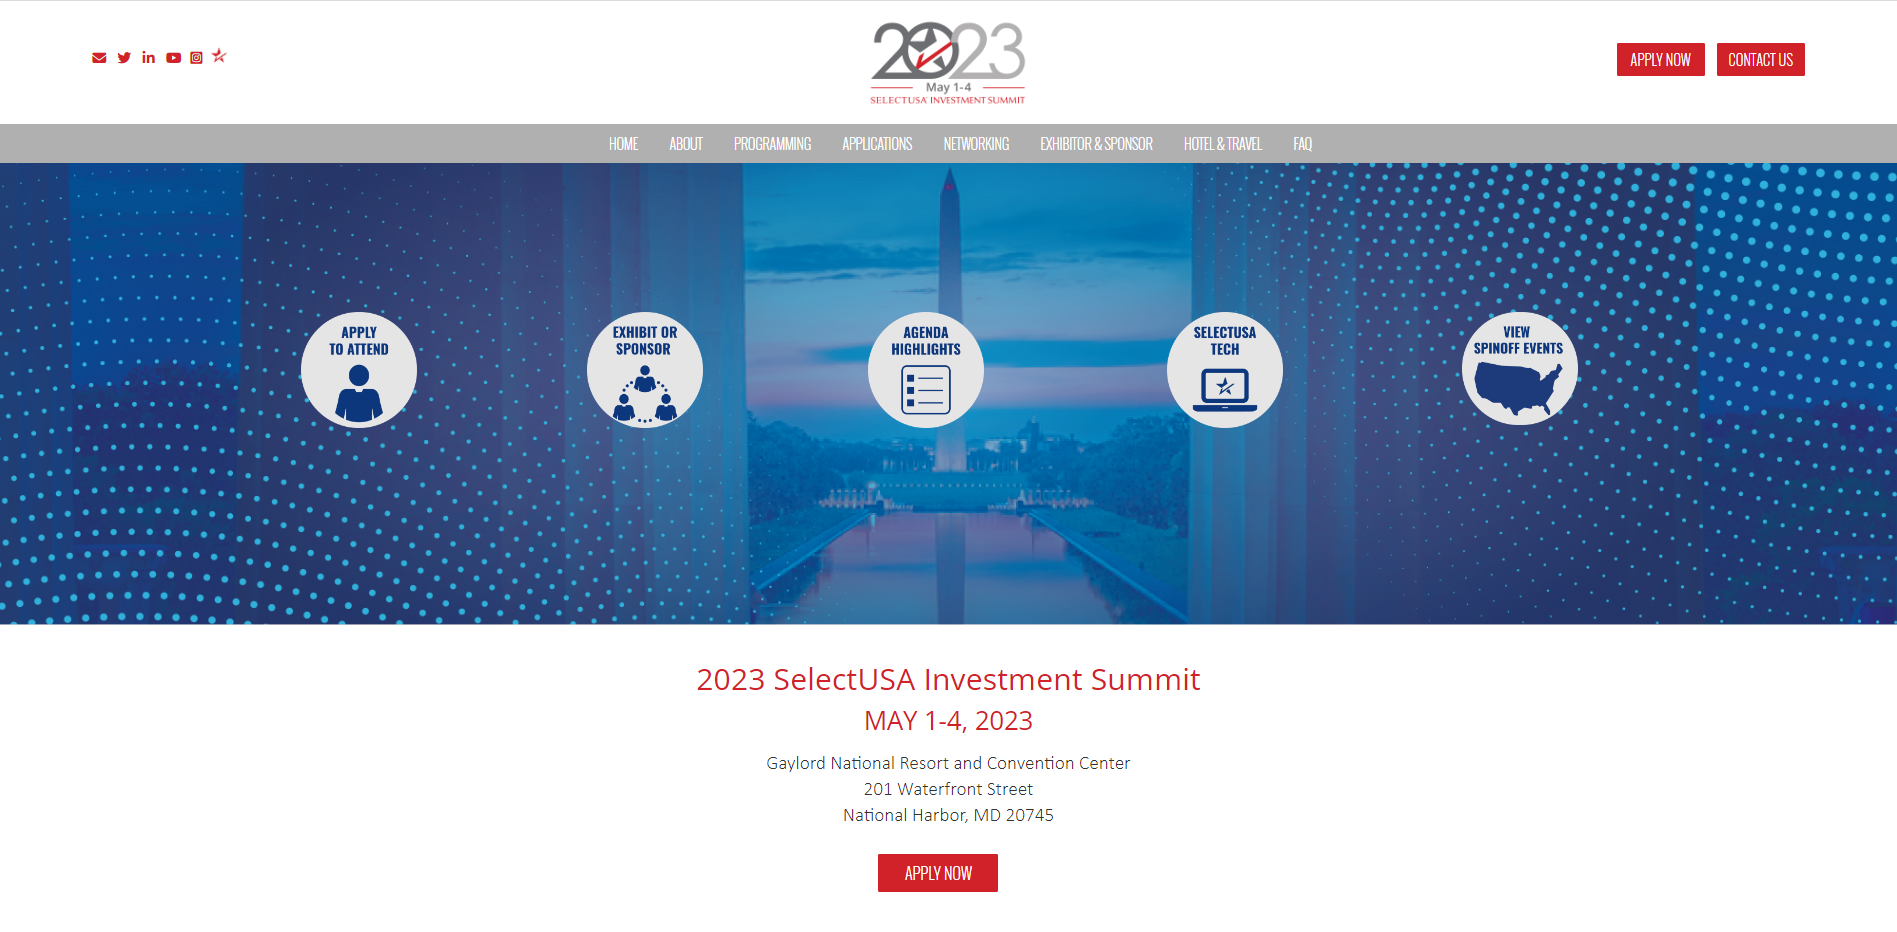 Screenshot of the home page of the Investment Summit website.